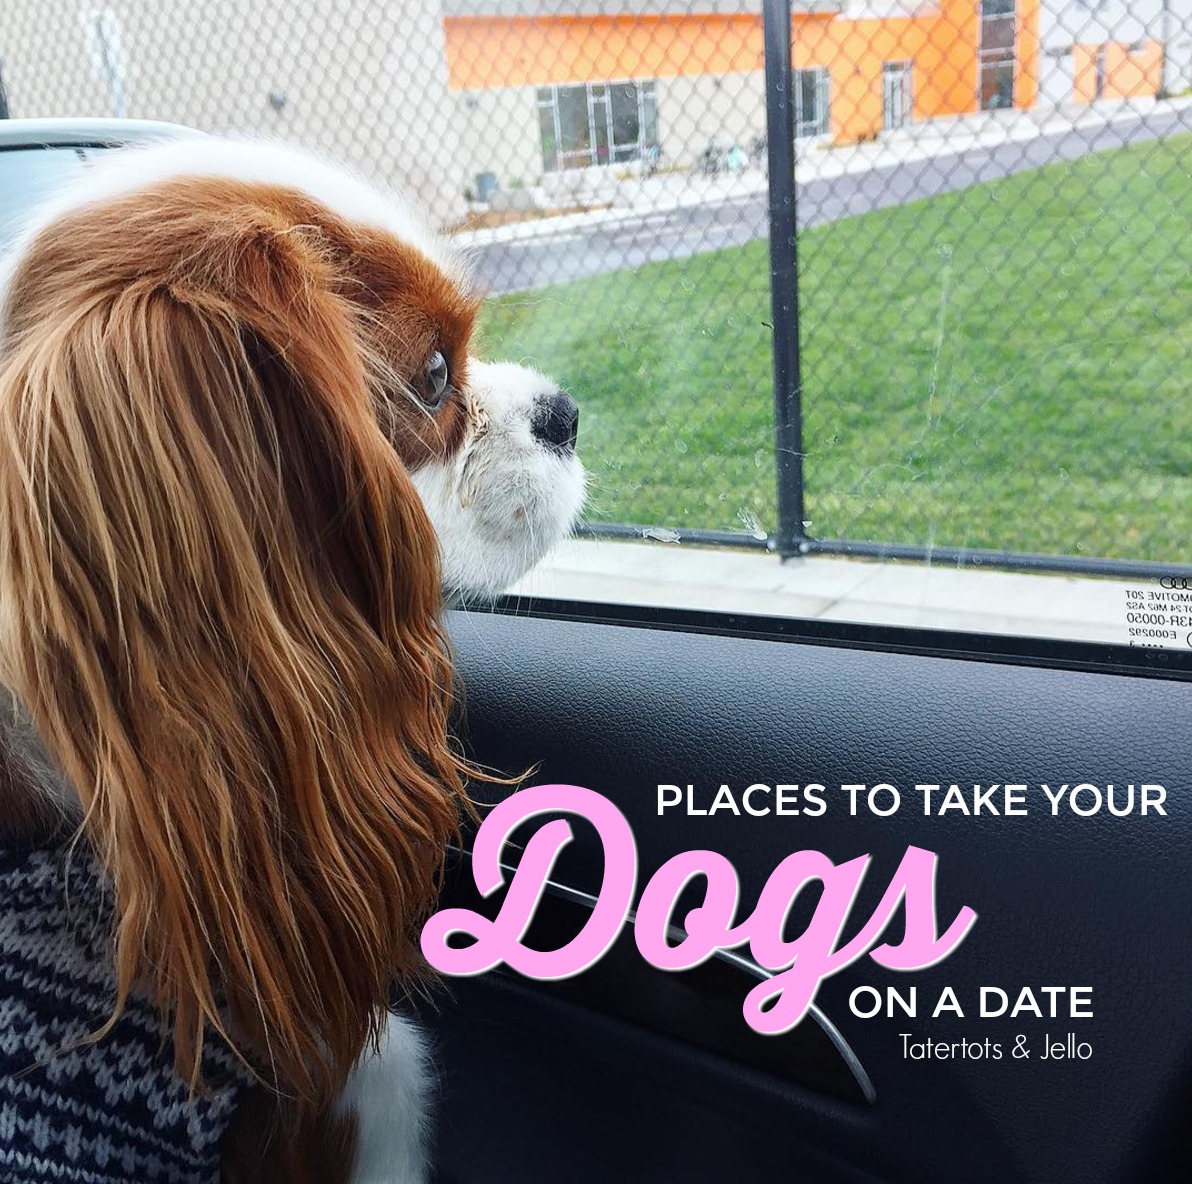 places to take your dog on a doggie date. Pet friendly restaurants.